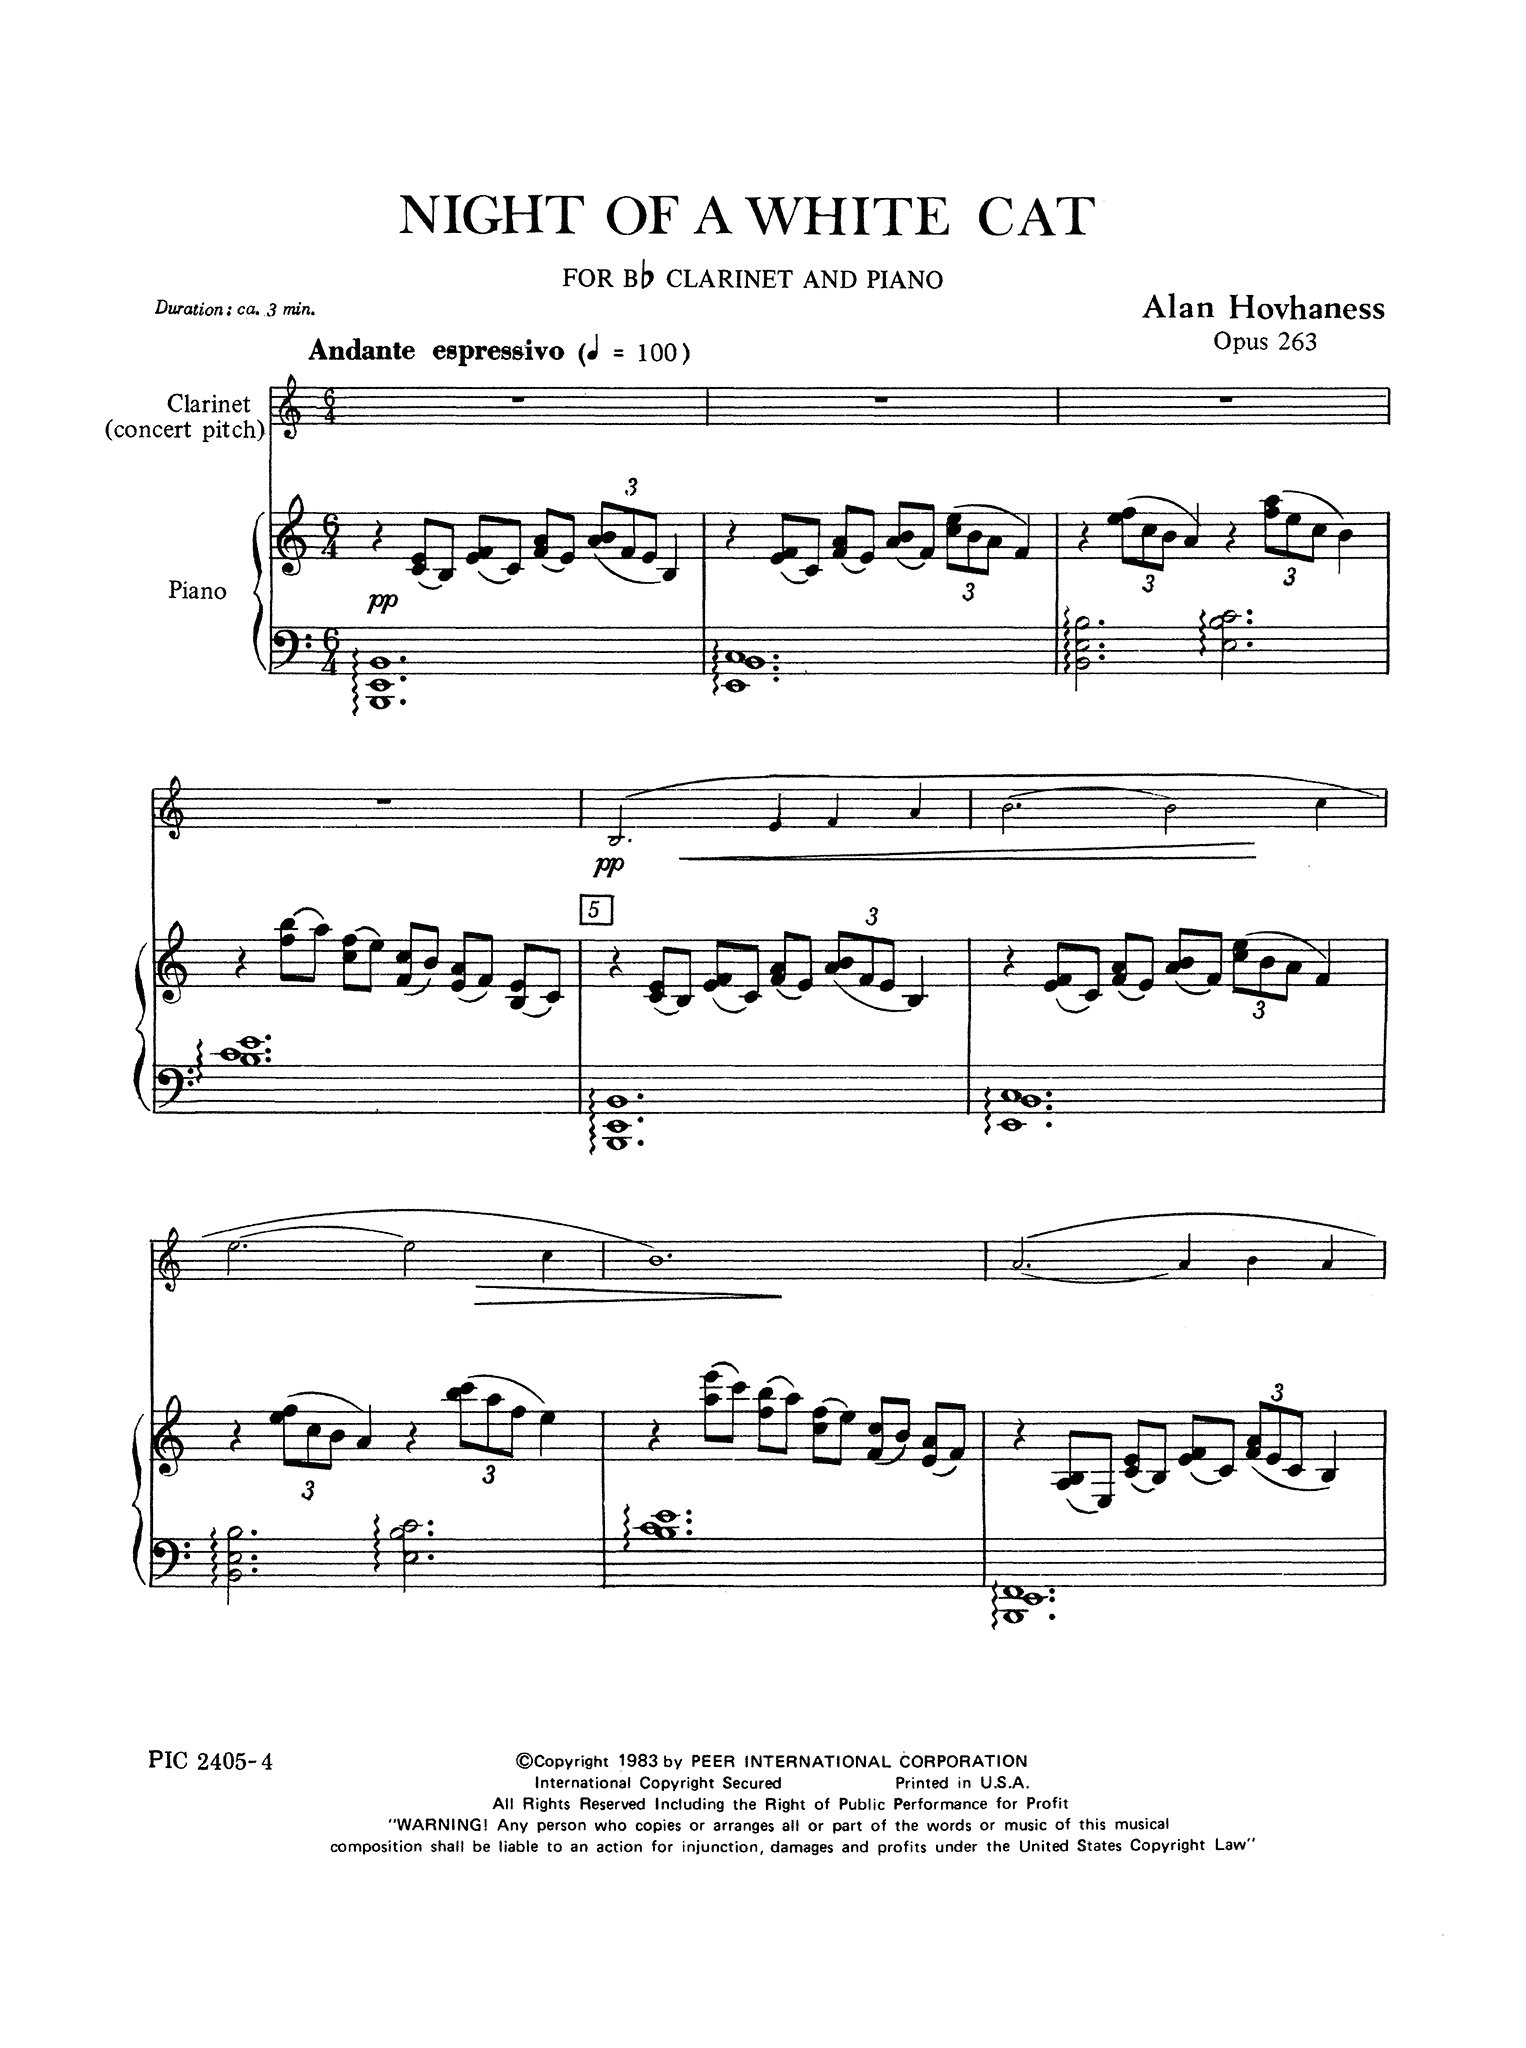 Hovhaness Night of a White Cat, Op. 263 clarinet and piano score